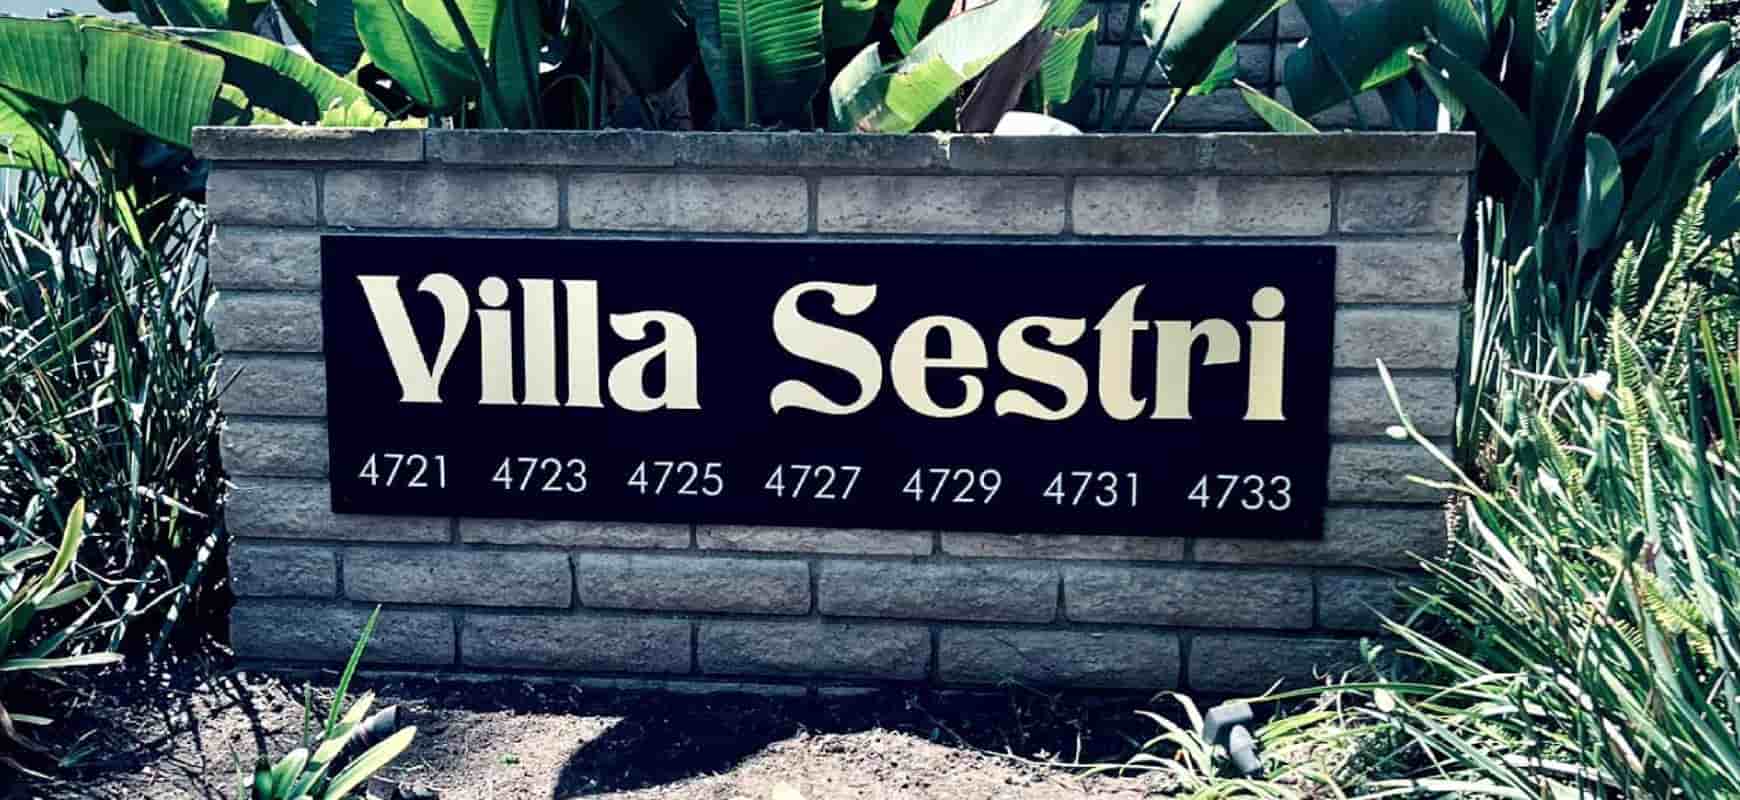 Villa Sestri condominium sign in a freestanding style made of acrylic and brushed aluminum